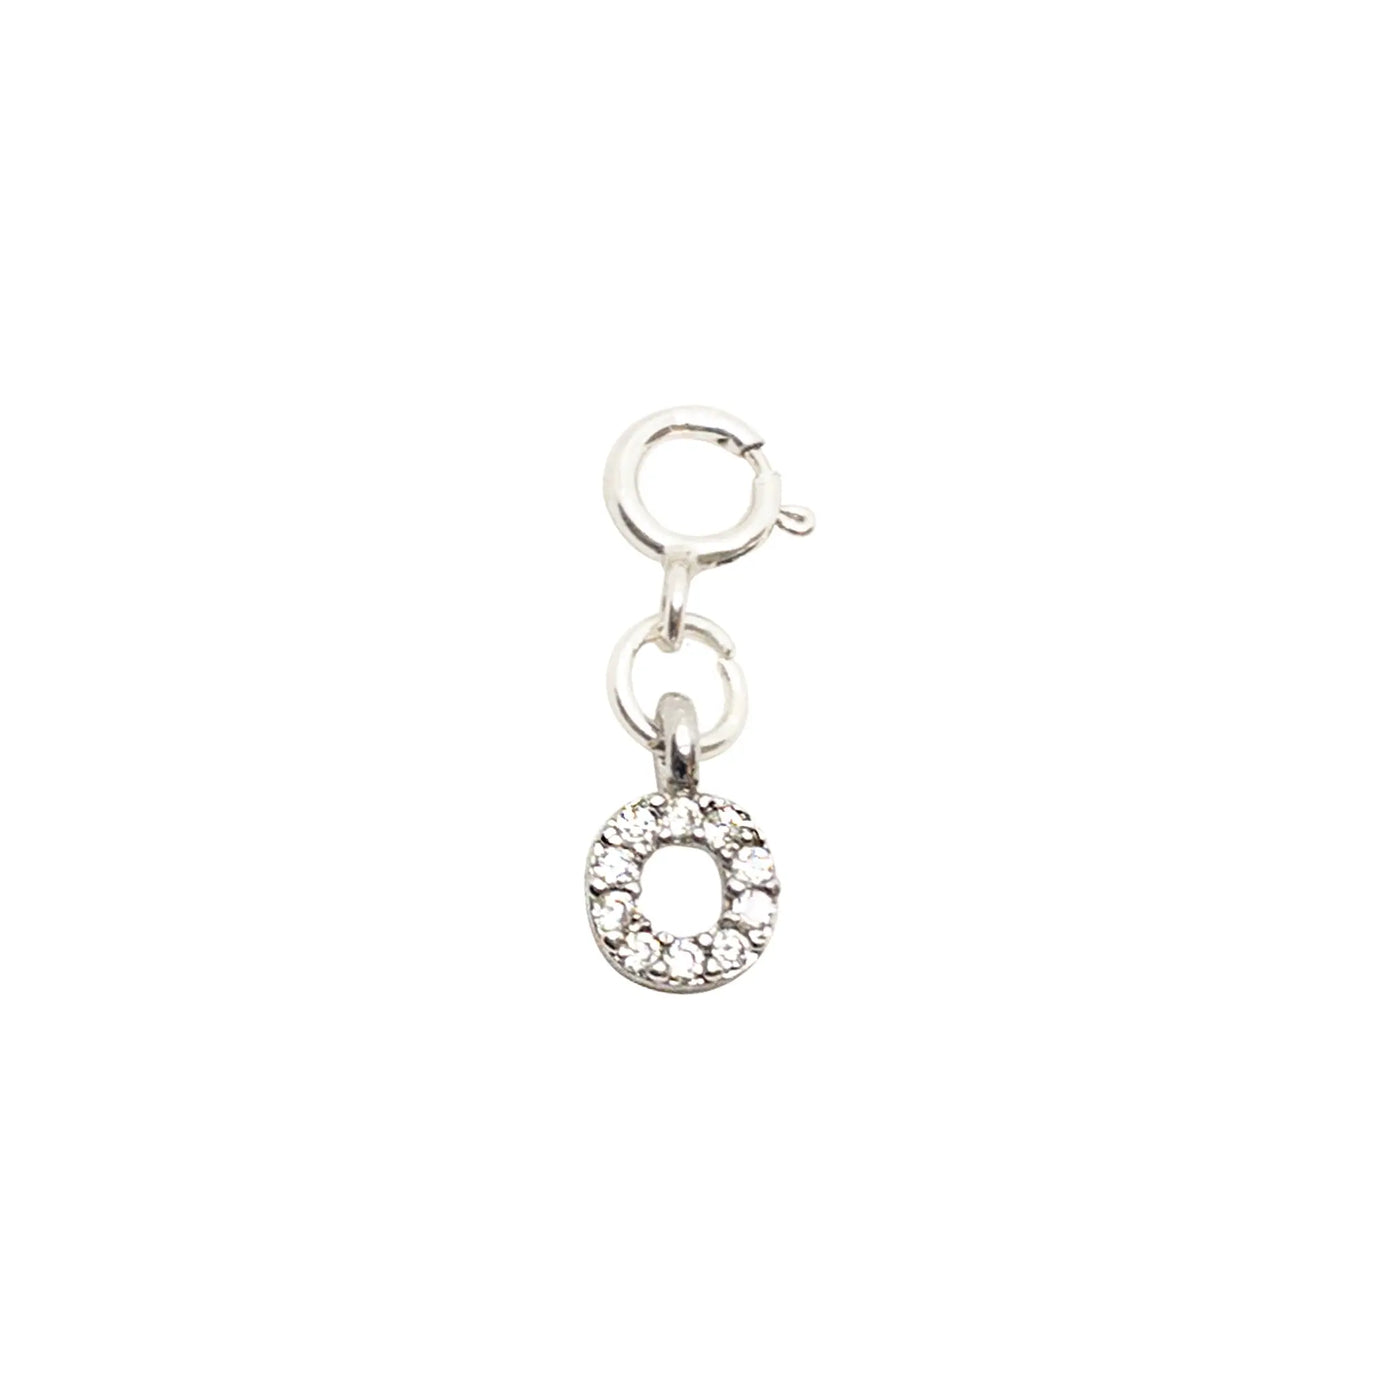 Initial O - Silver Charm LaCkore Couture